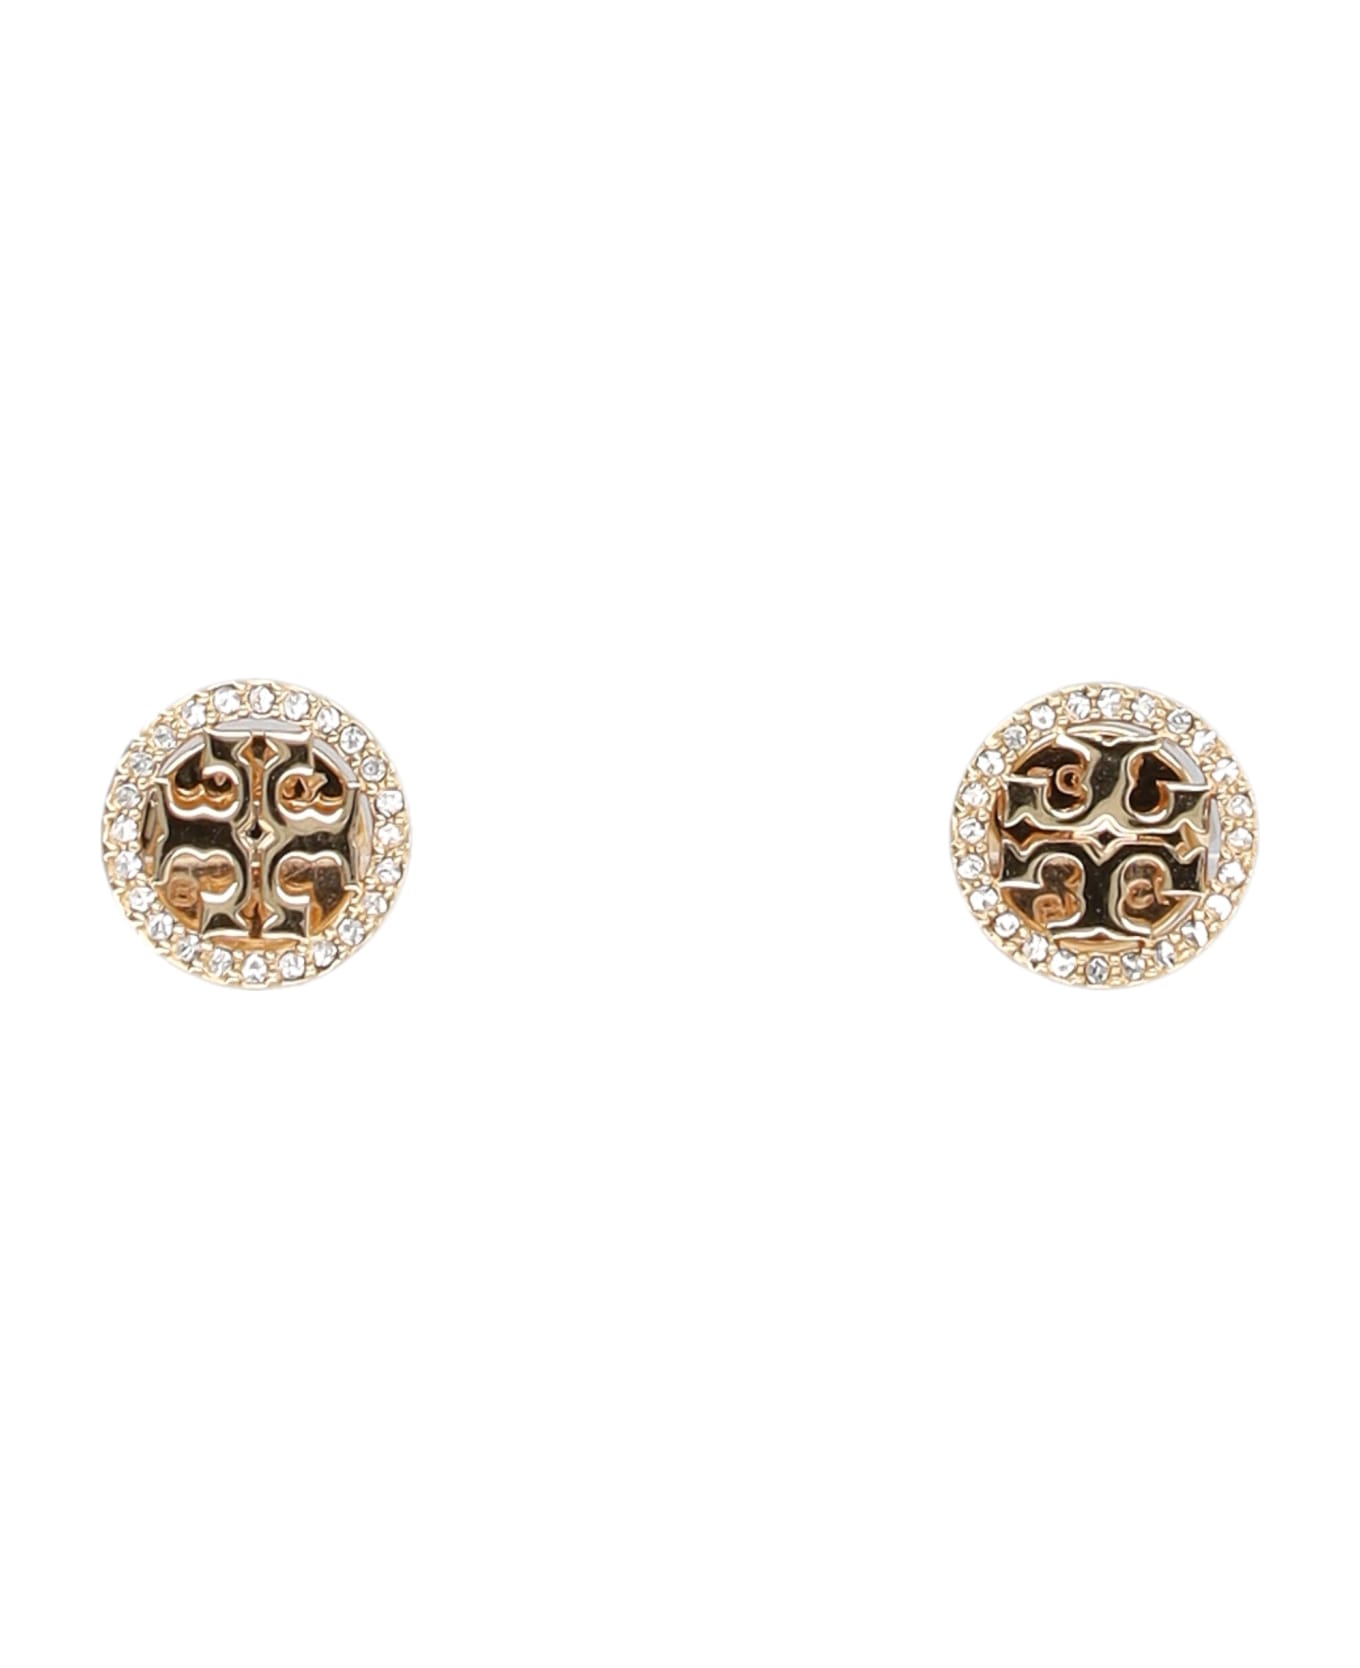 Tory Burch Miller Pave Stud Earring - Tory Gold / Crystal